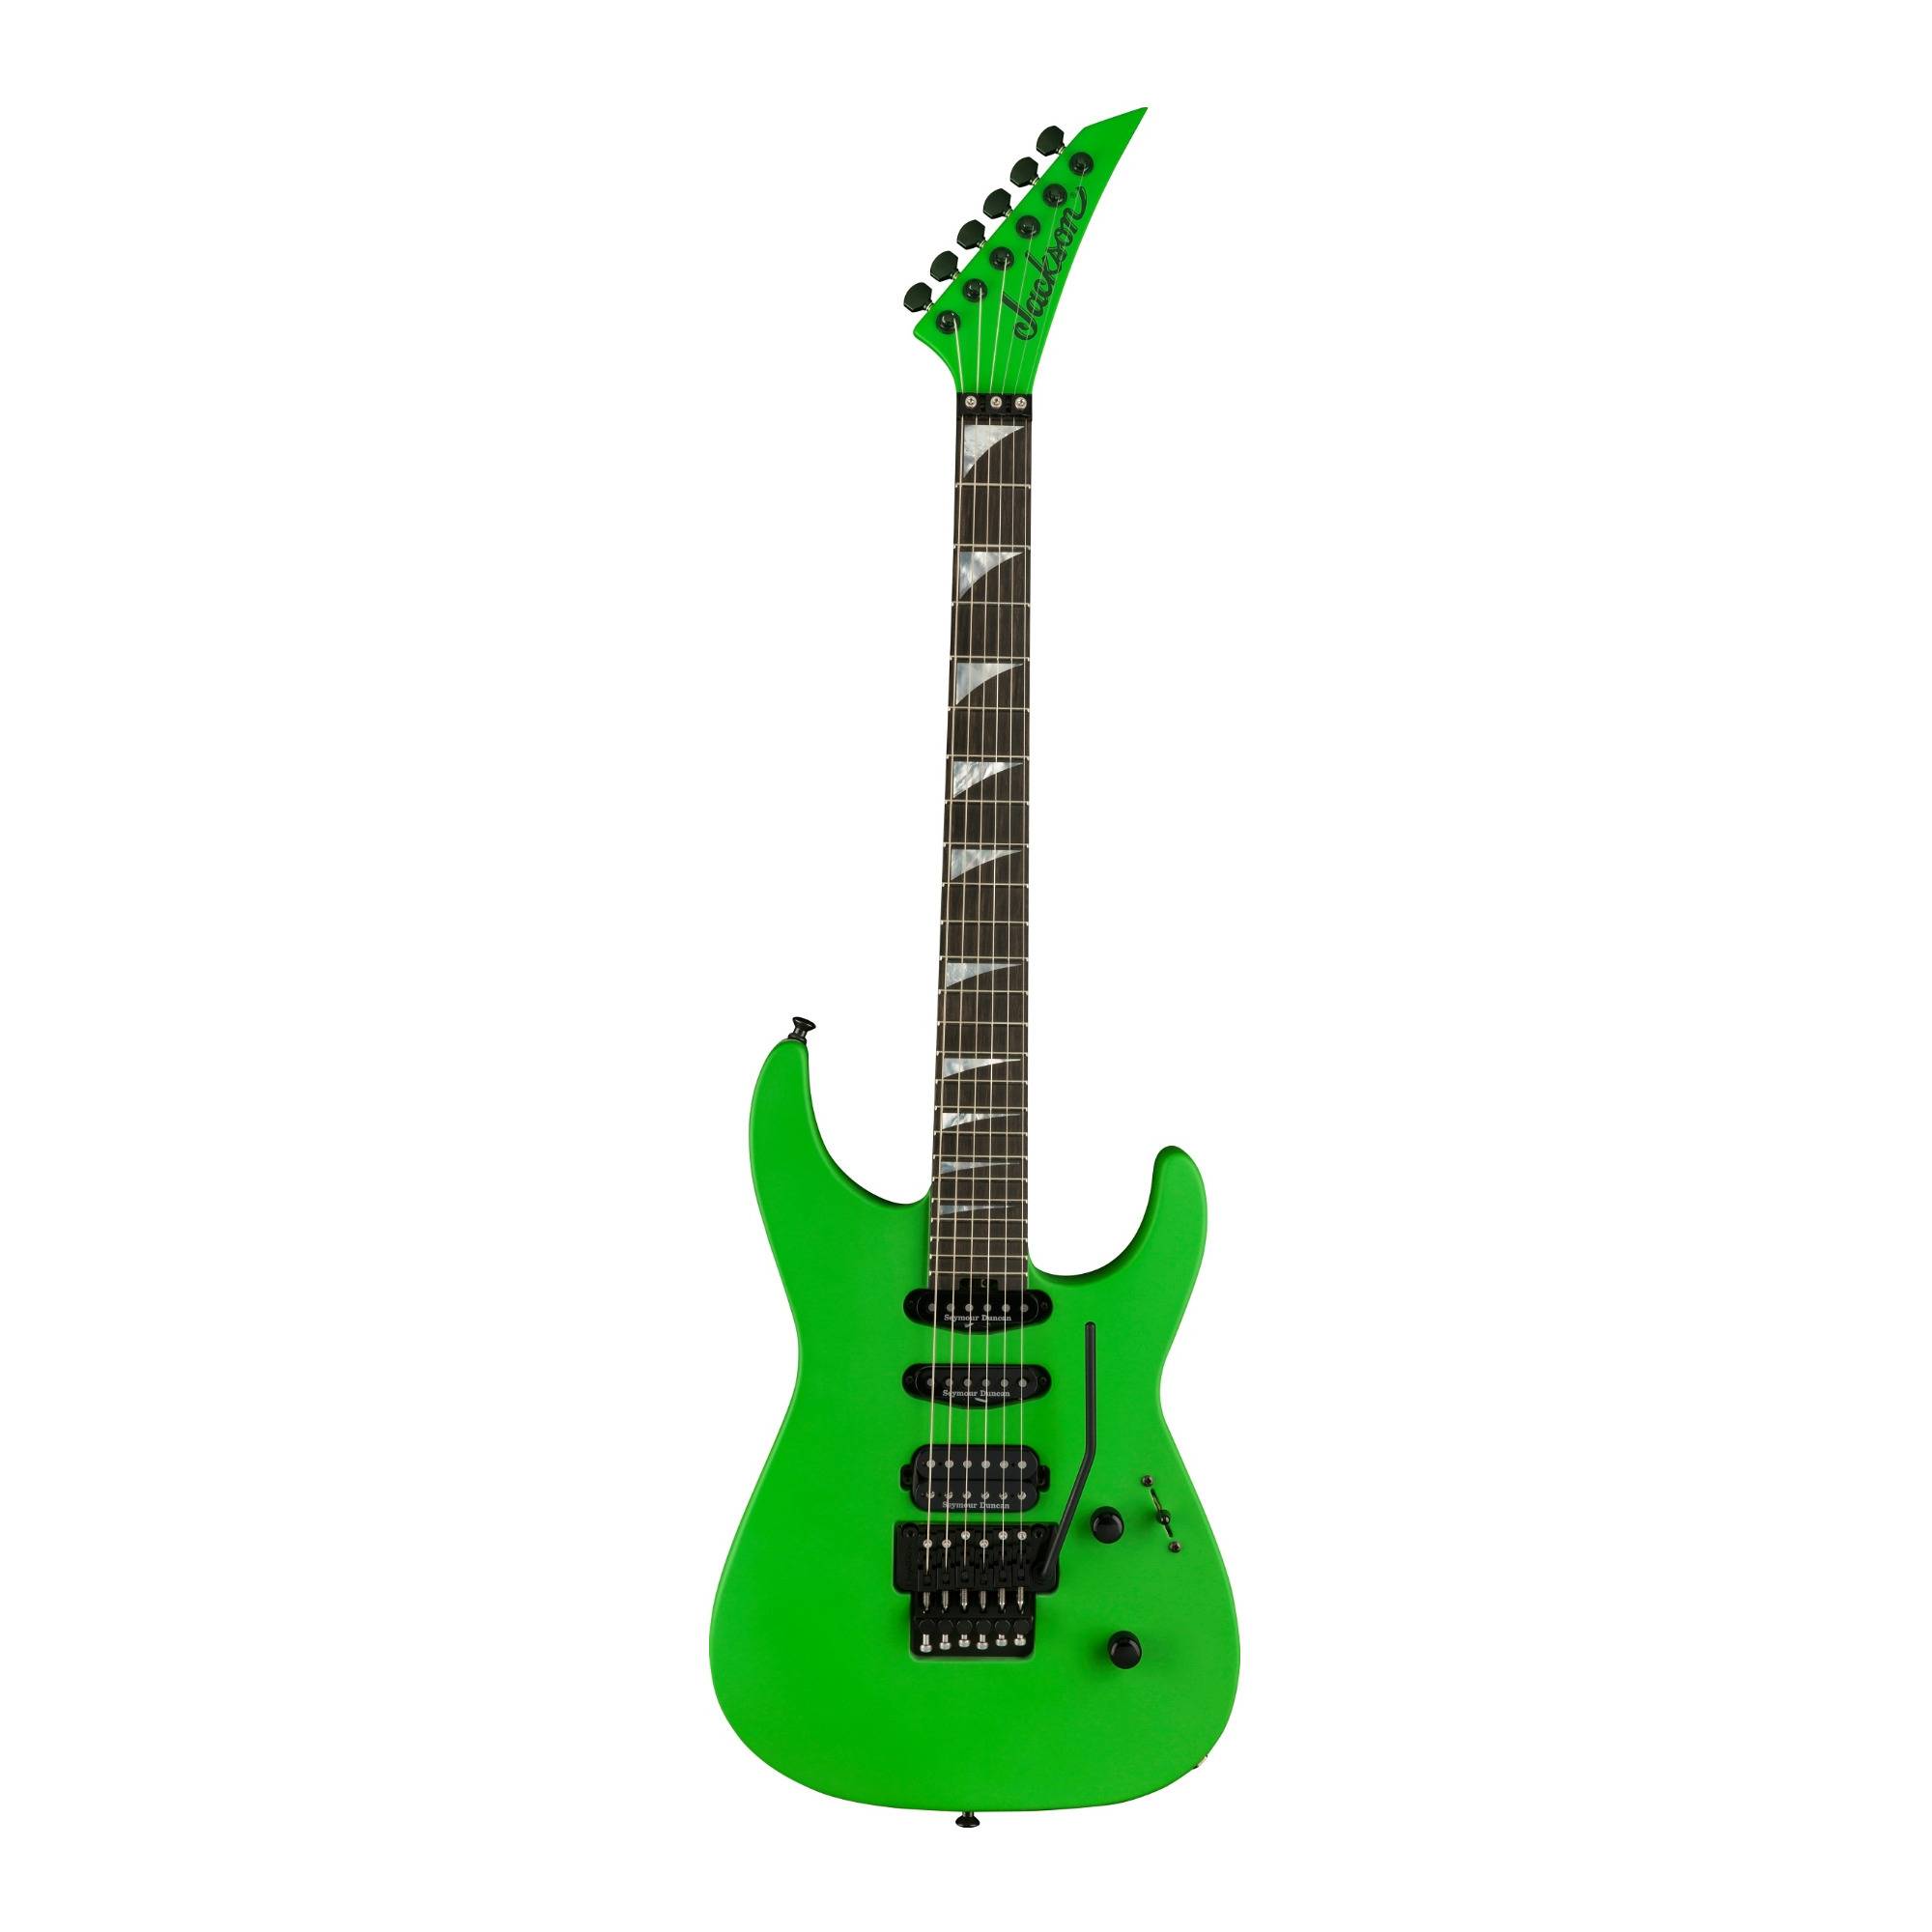 Jackson American Series Soloist SL3 6-String Electric Guitar (Right-Handed, Slime Green)